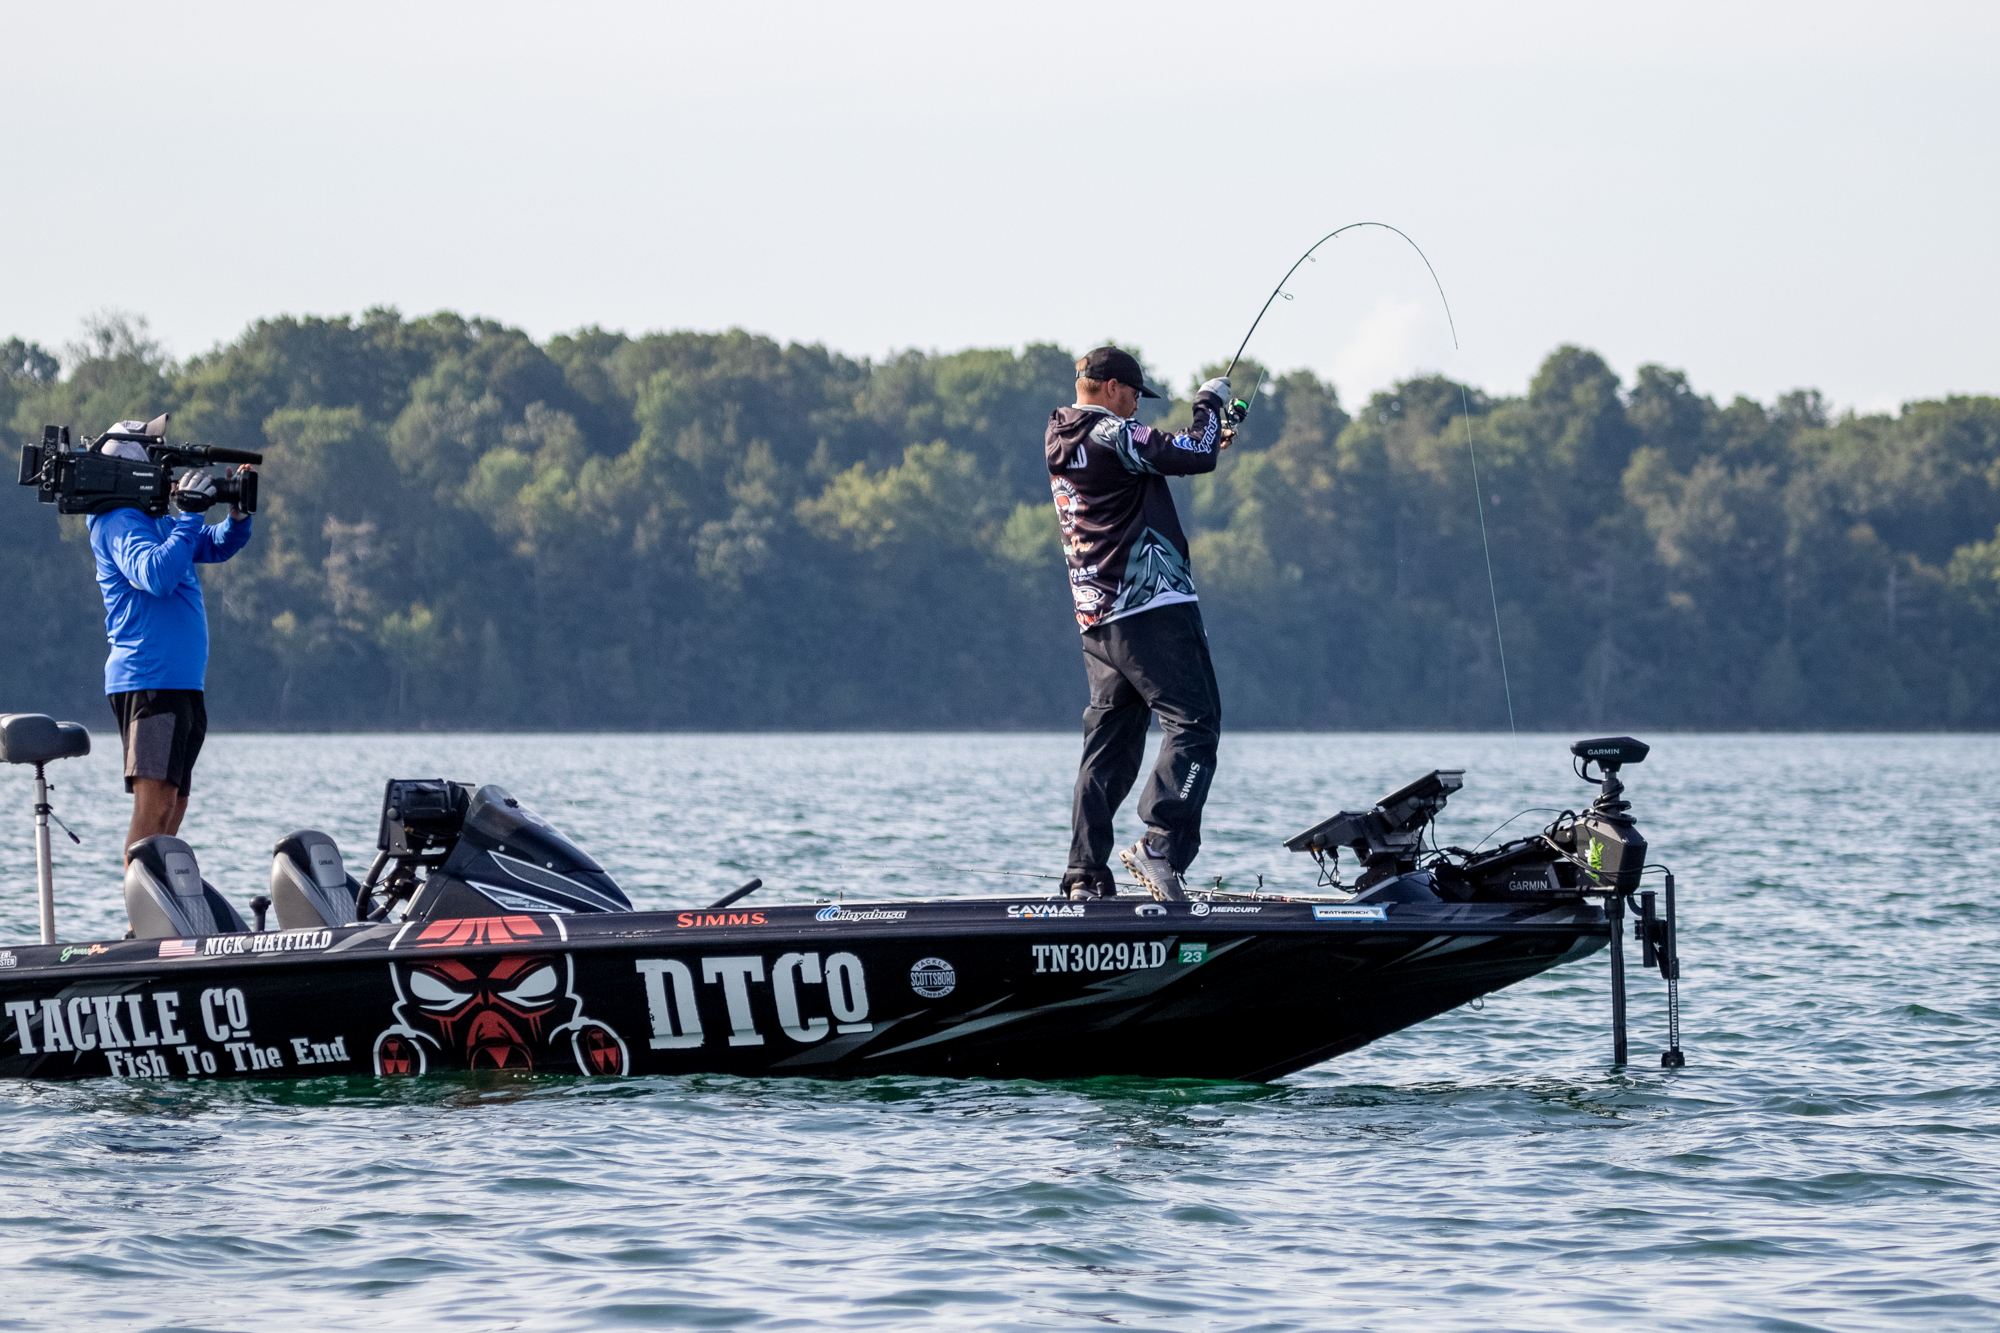 Old Boards, New Twists - Major League Fishing